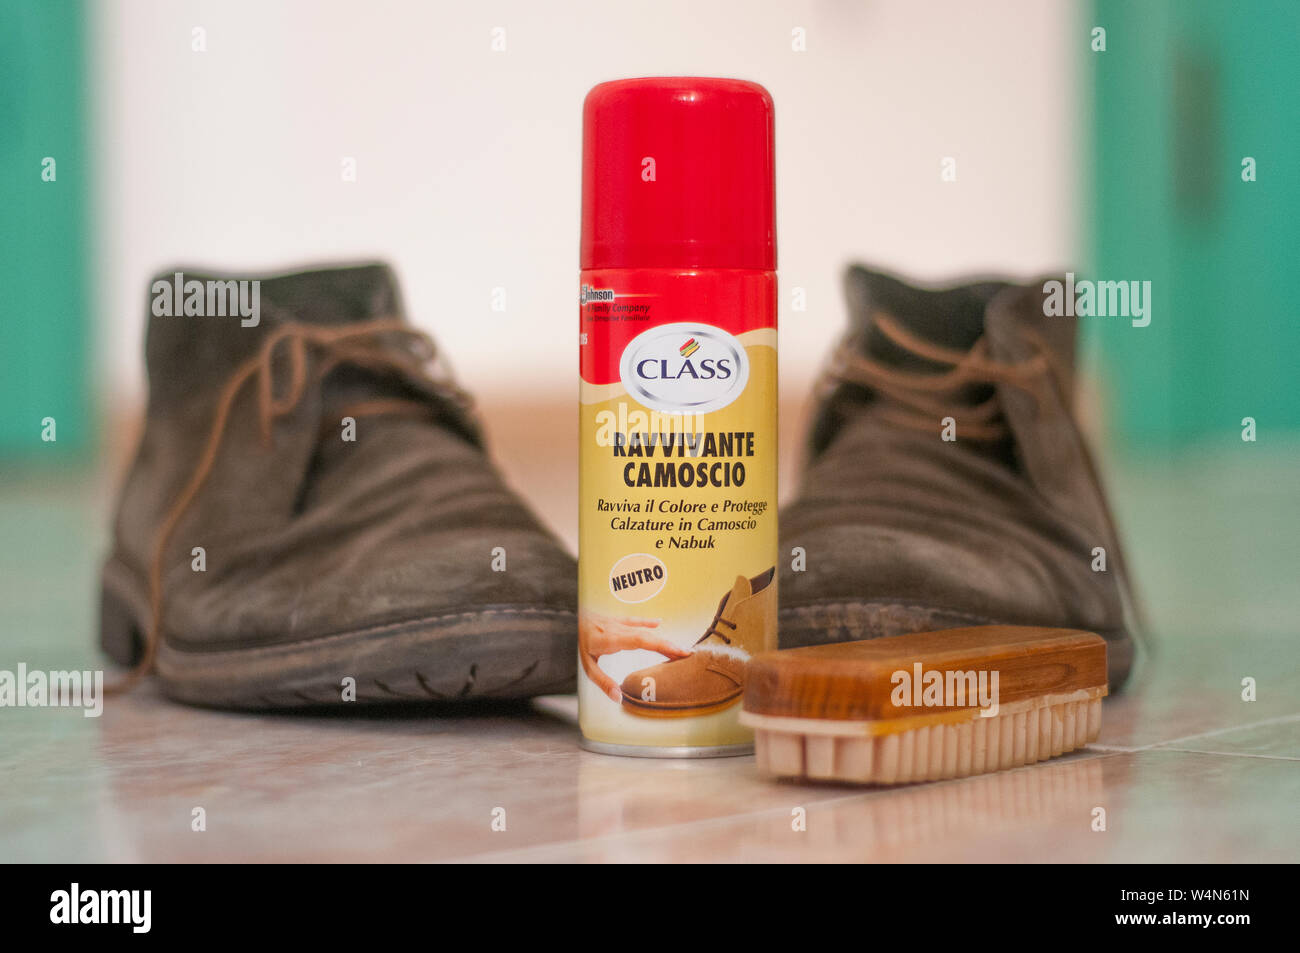 Philips Sneaker Shoe Cleaner launched in India